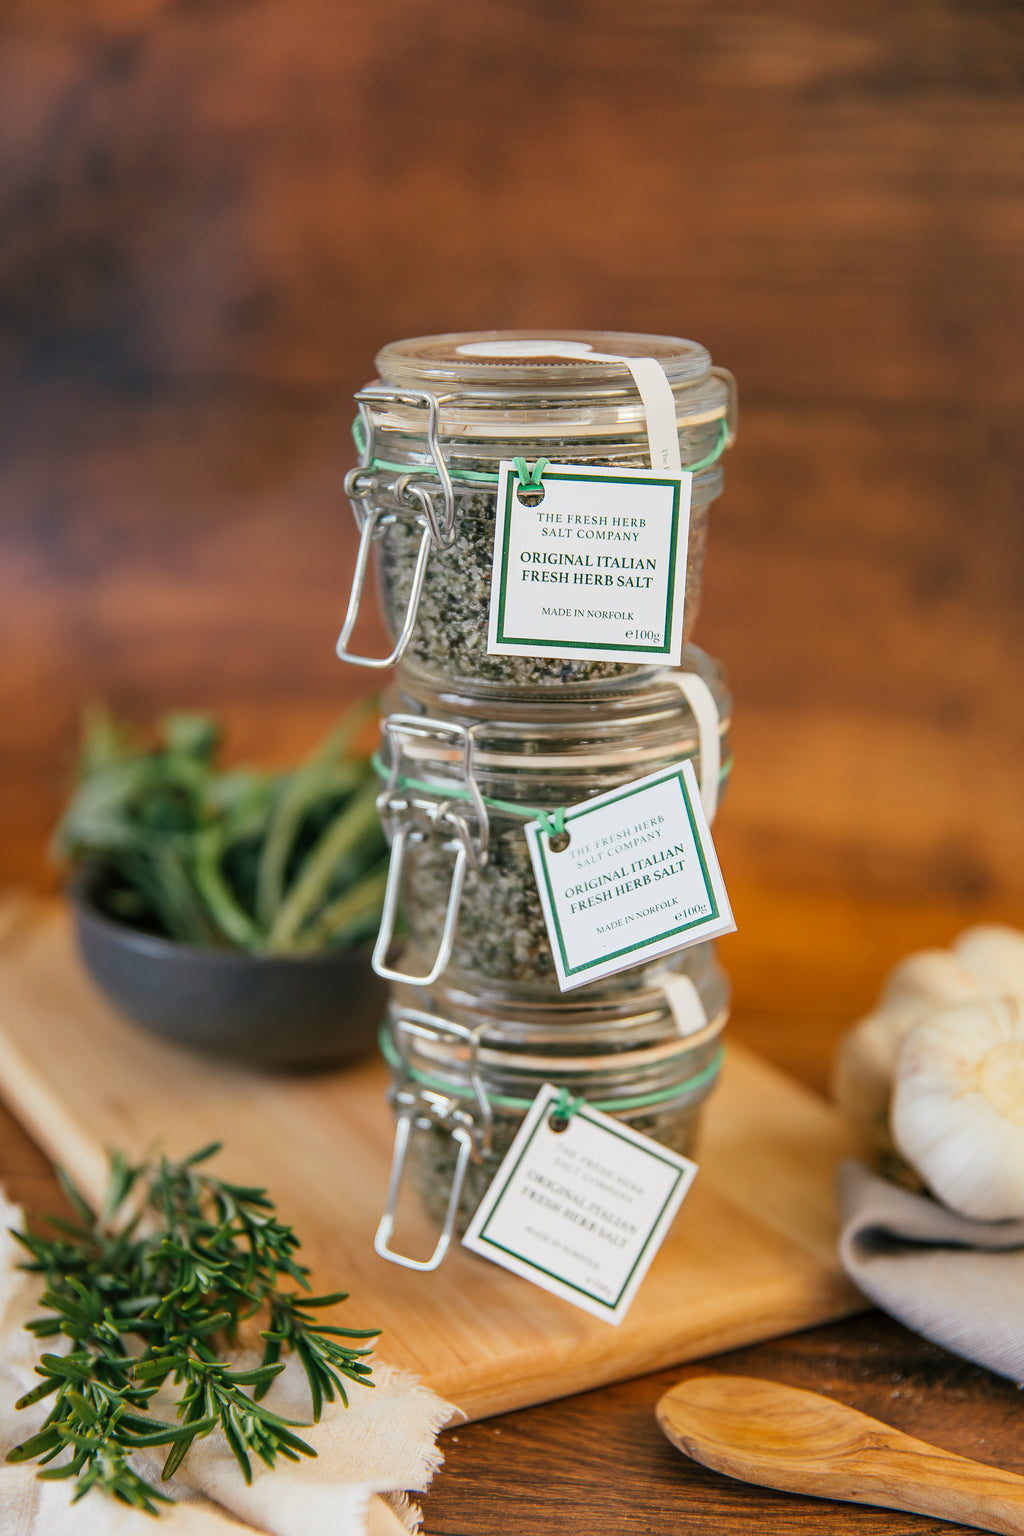 "Capture the essence of an Italian kitchen with this image showcasing 3 glass Kilner jars as a discounted package, filled with a vibrant Original Italian Fresh Herb Sea Salt Seasoning. The jar contains a harmonious blend of rosemary, garlic, basil, sage, and bay, set against a backdrop of white sea salt for a visually pleasing presentation. A convenient way to save money and give a jar to your friends as a gift!"